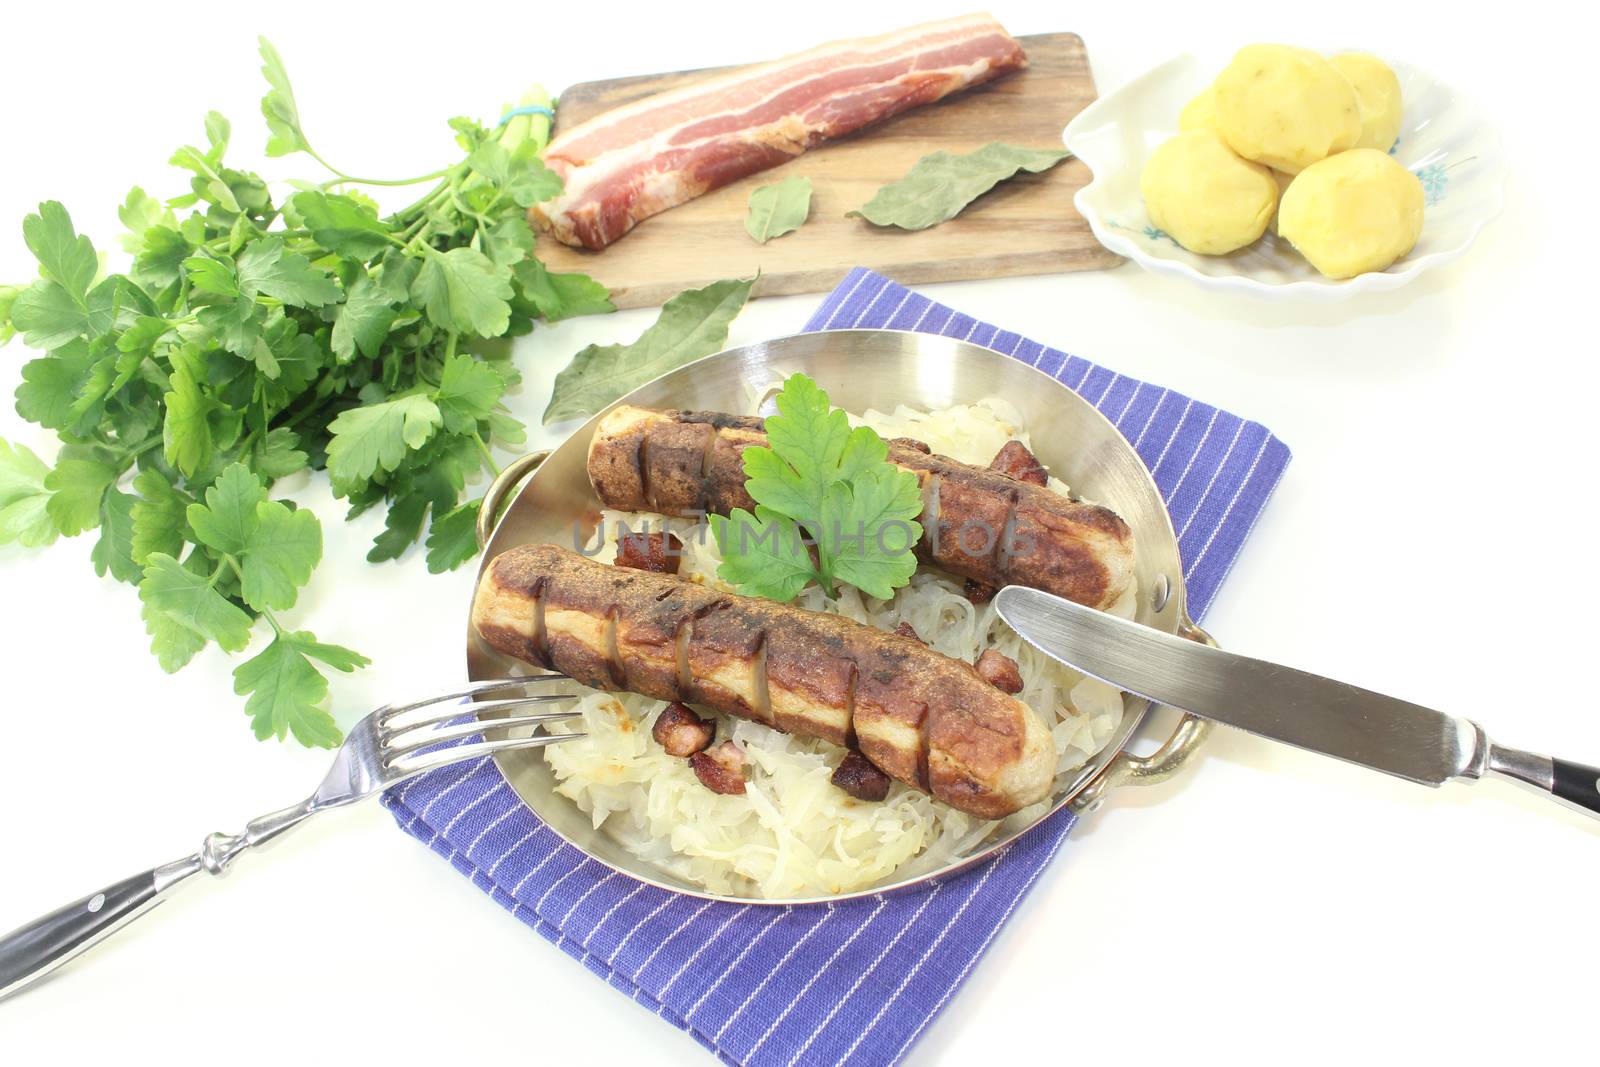 Brawurst with Sauerkraut and parsley by discovery